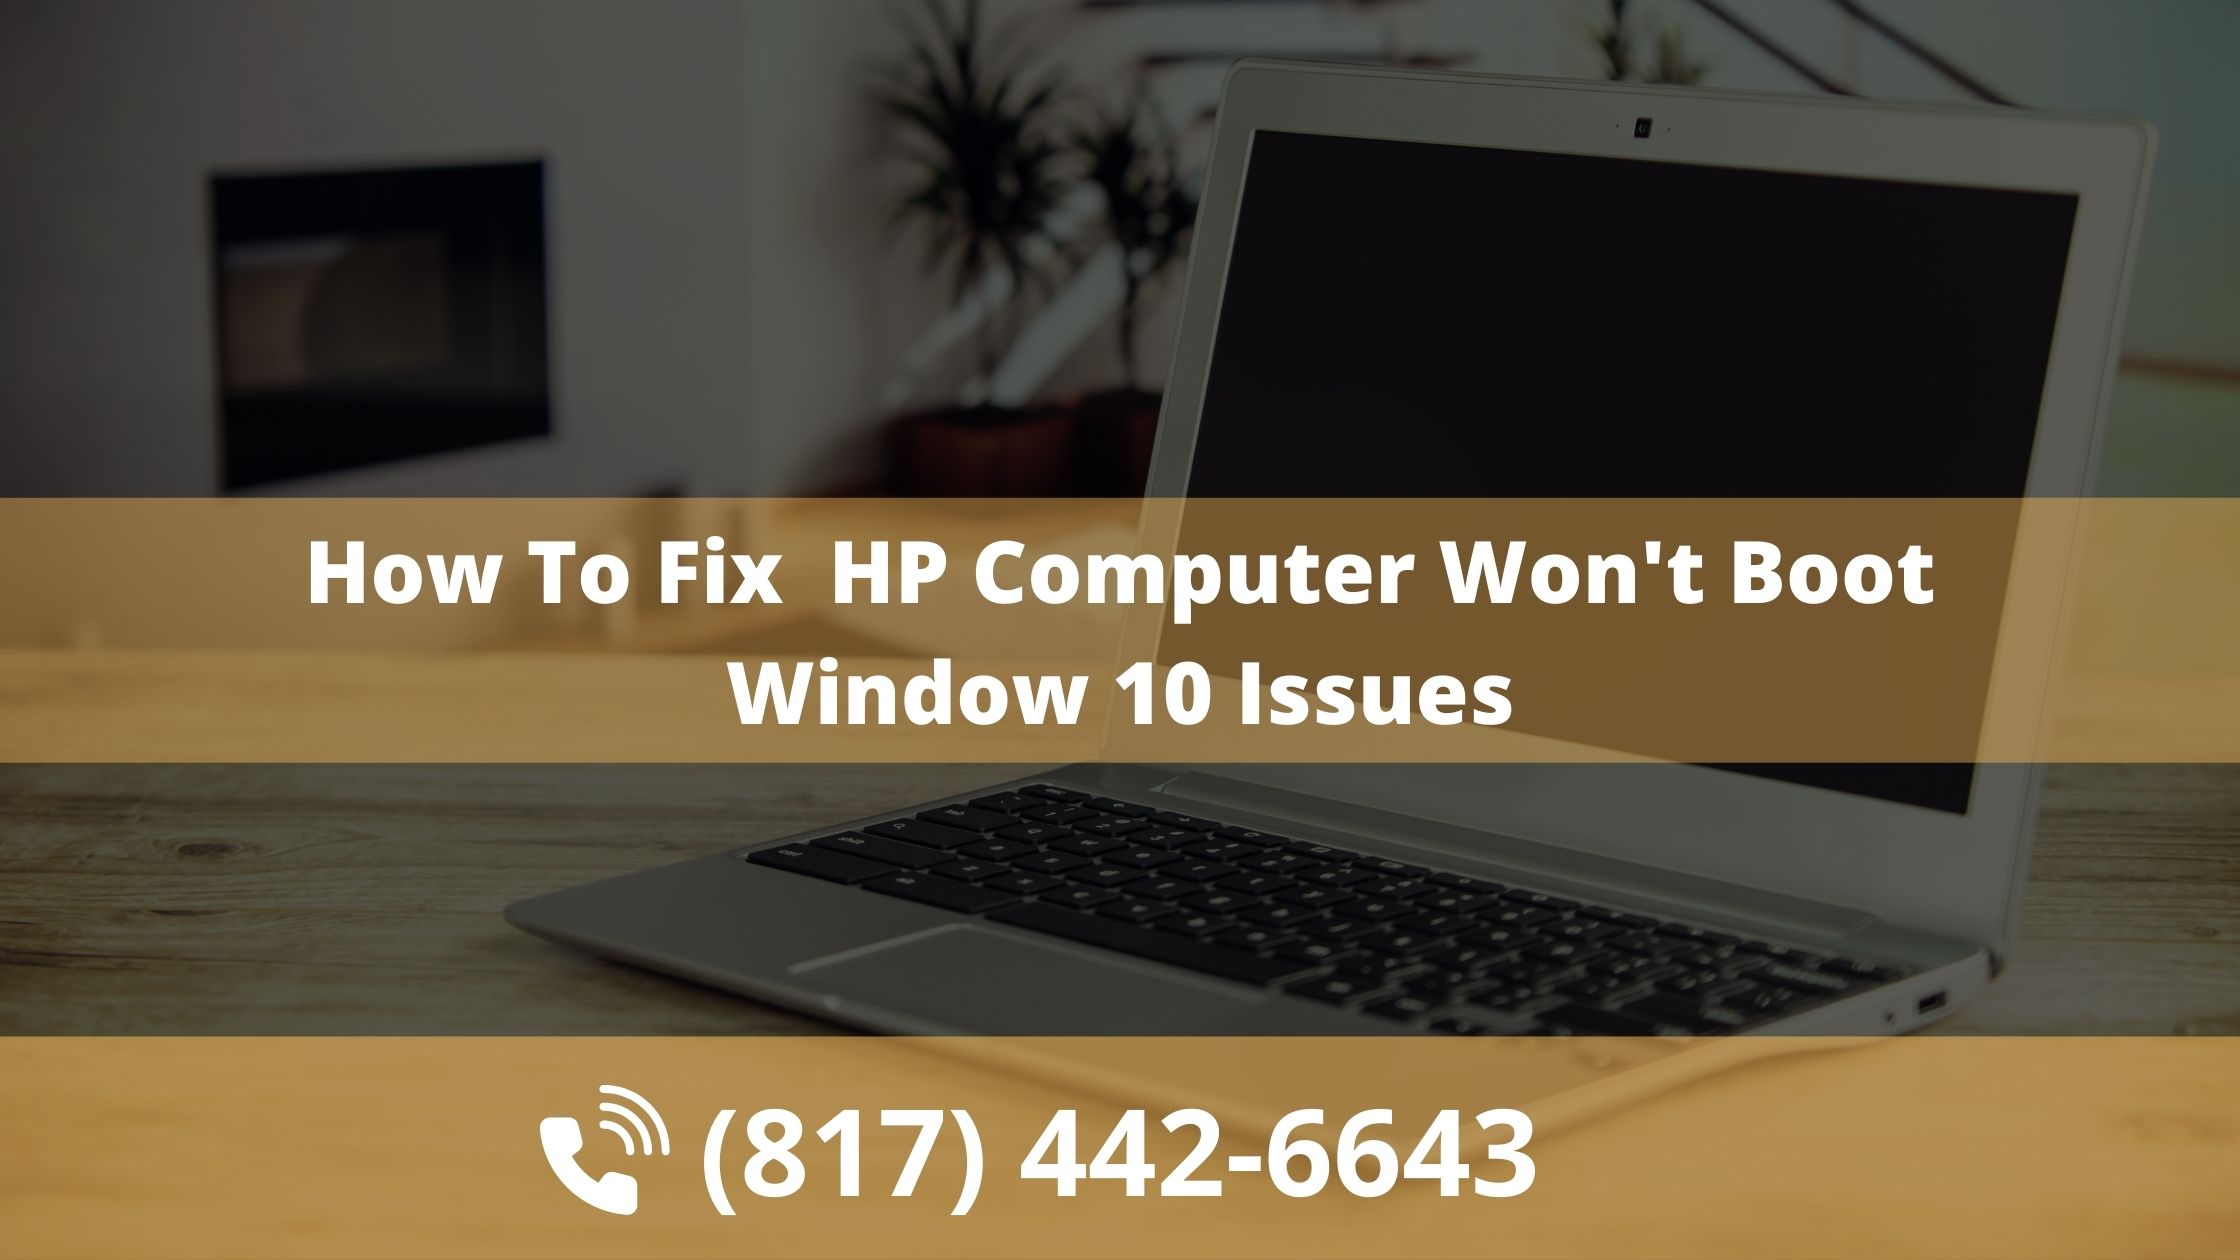 How To Fix (817) 442-6643 HP Computer Won't Boot Window 10 Issues